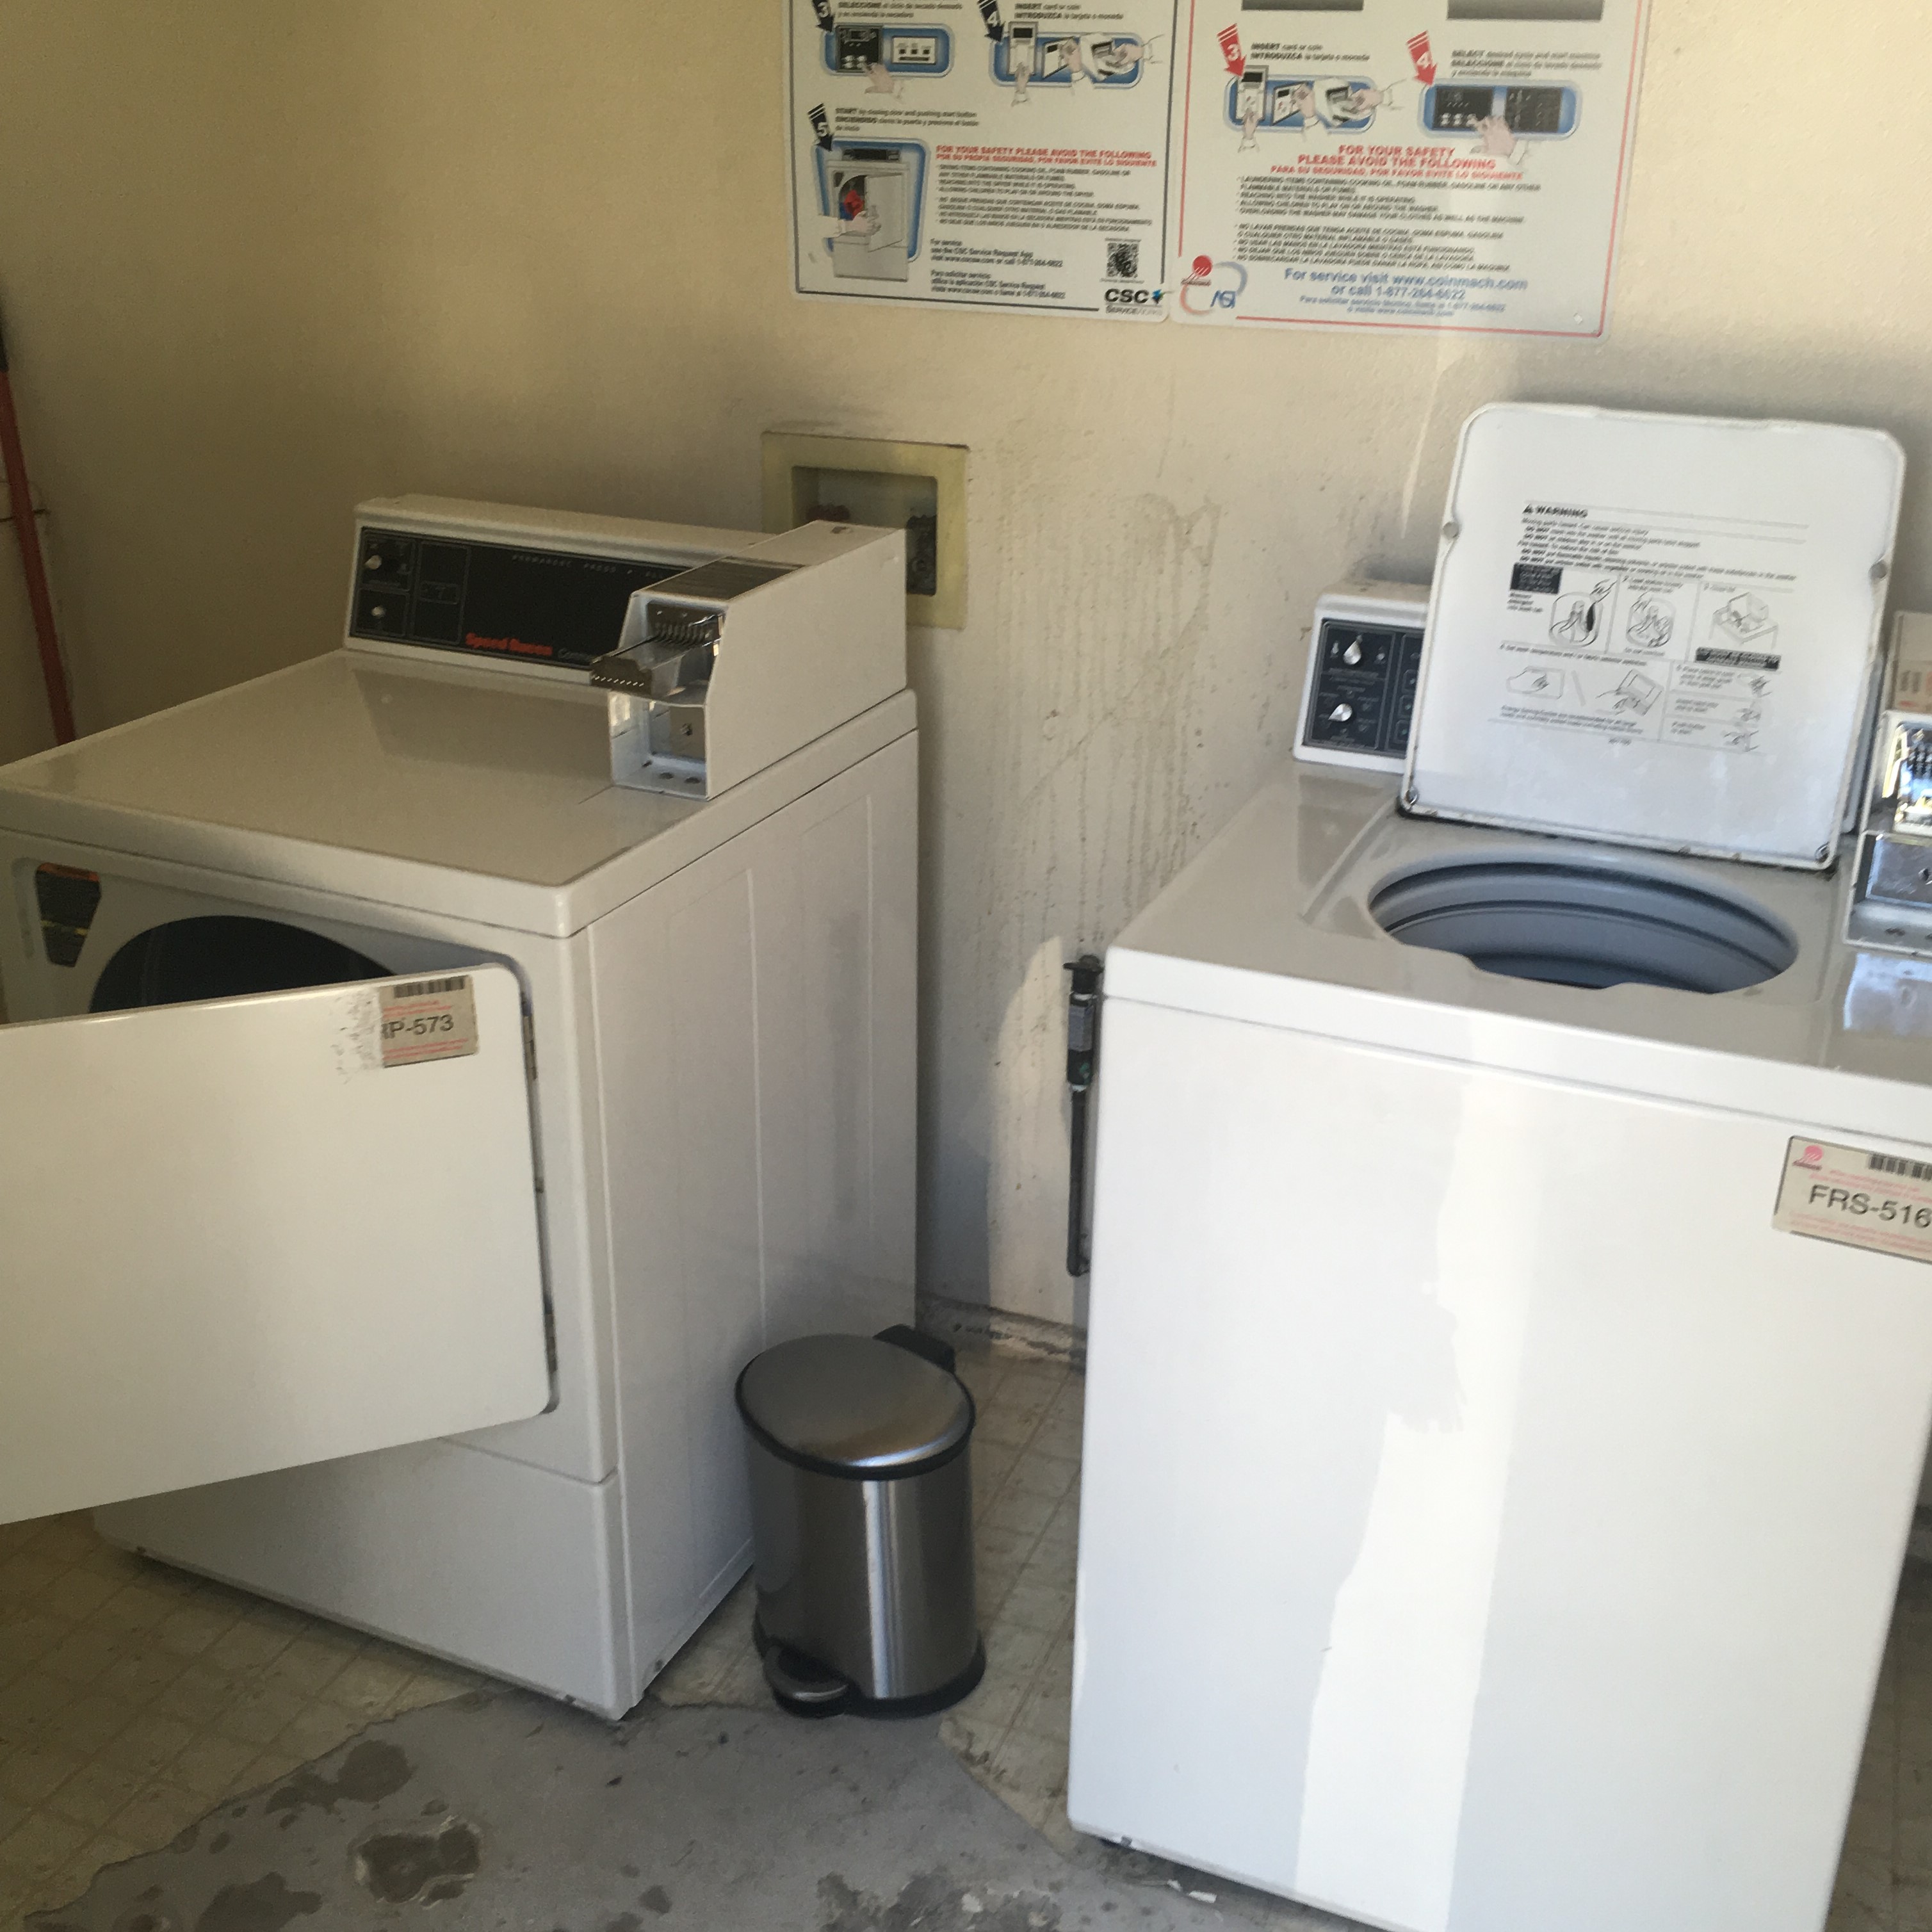 Small laundry room with one washer and one dryer. Intructions on how to use machinery are posted on the wall. There is a small trash bin in betweeen the machines.